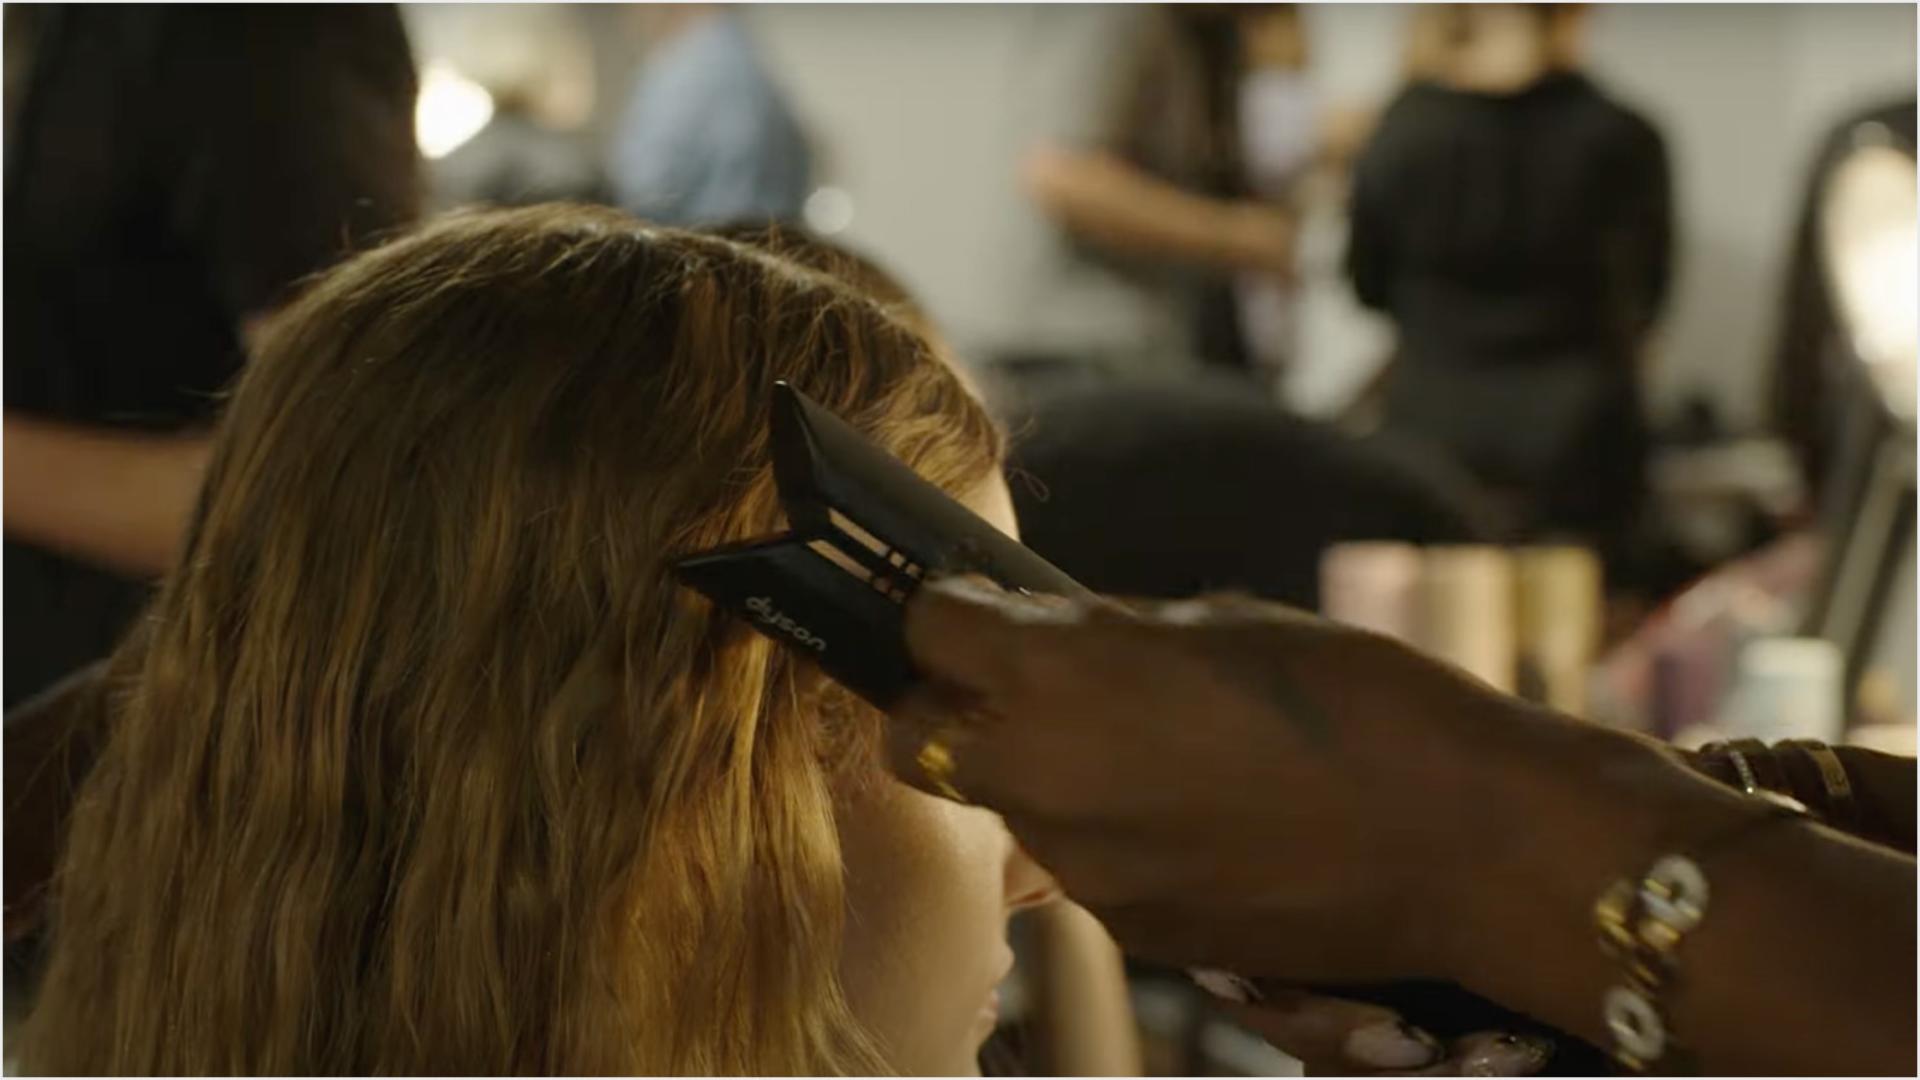 Mustafa speaking to Dyson backstage at last season's Fashion Week, revealing how he creates hair looks for Philip Lim